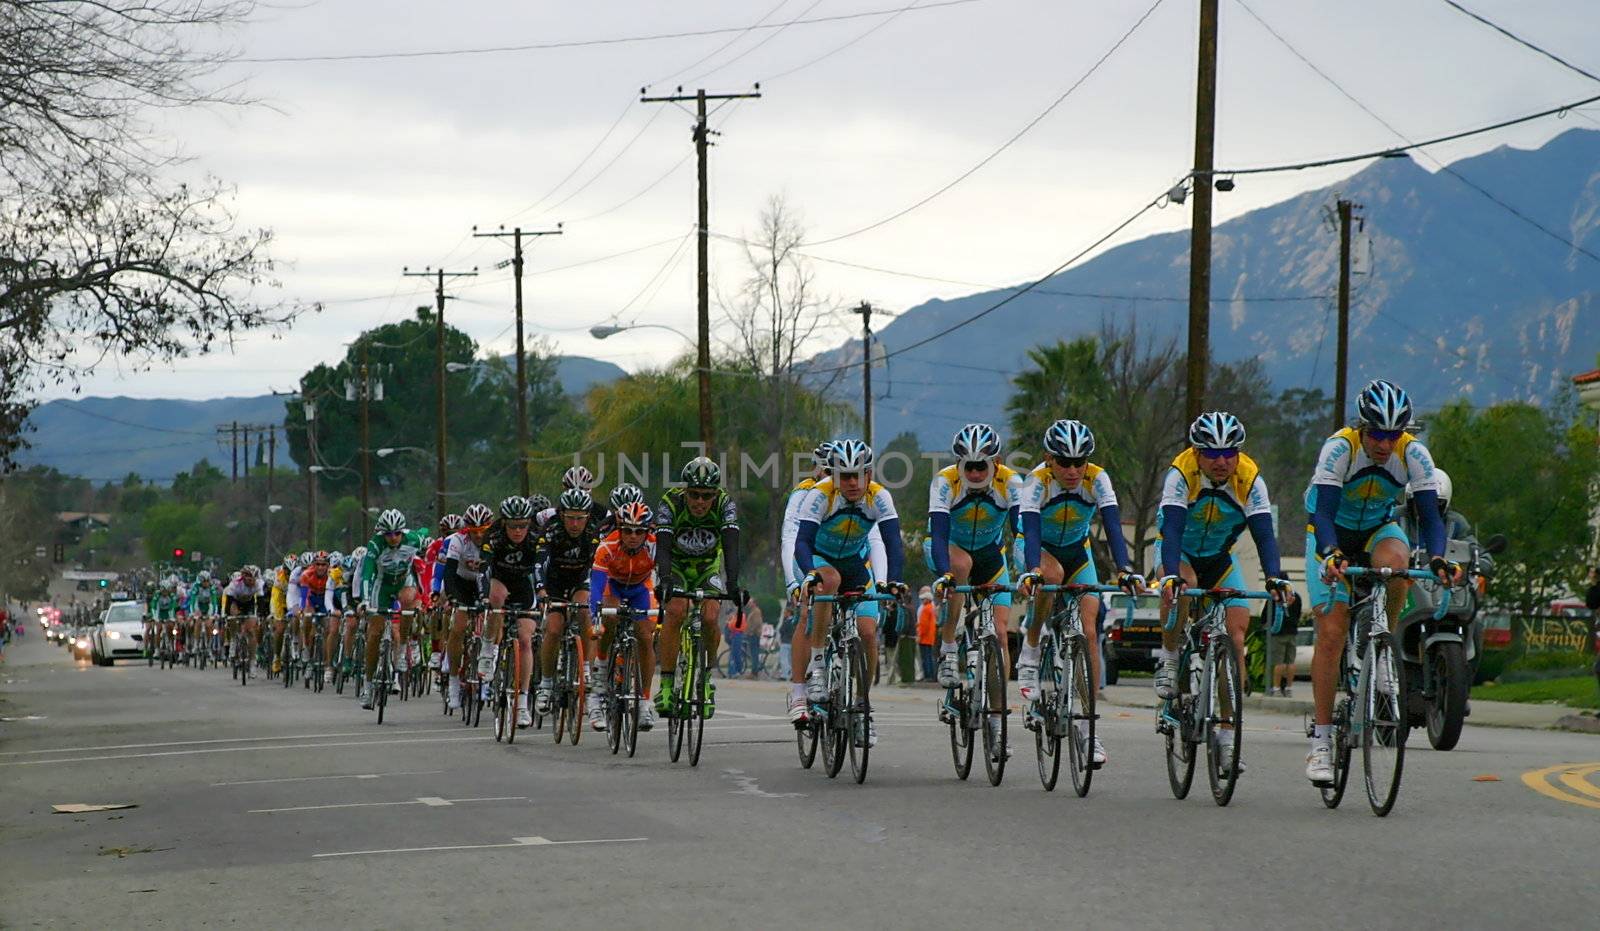 2008 Amgen Tour Of California is one of the biggest, if not the biggest, bike races in California. This is stage 6 going through the tourist town of Ojai.